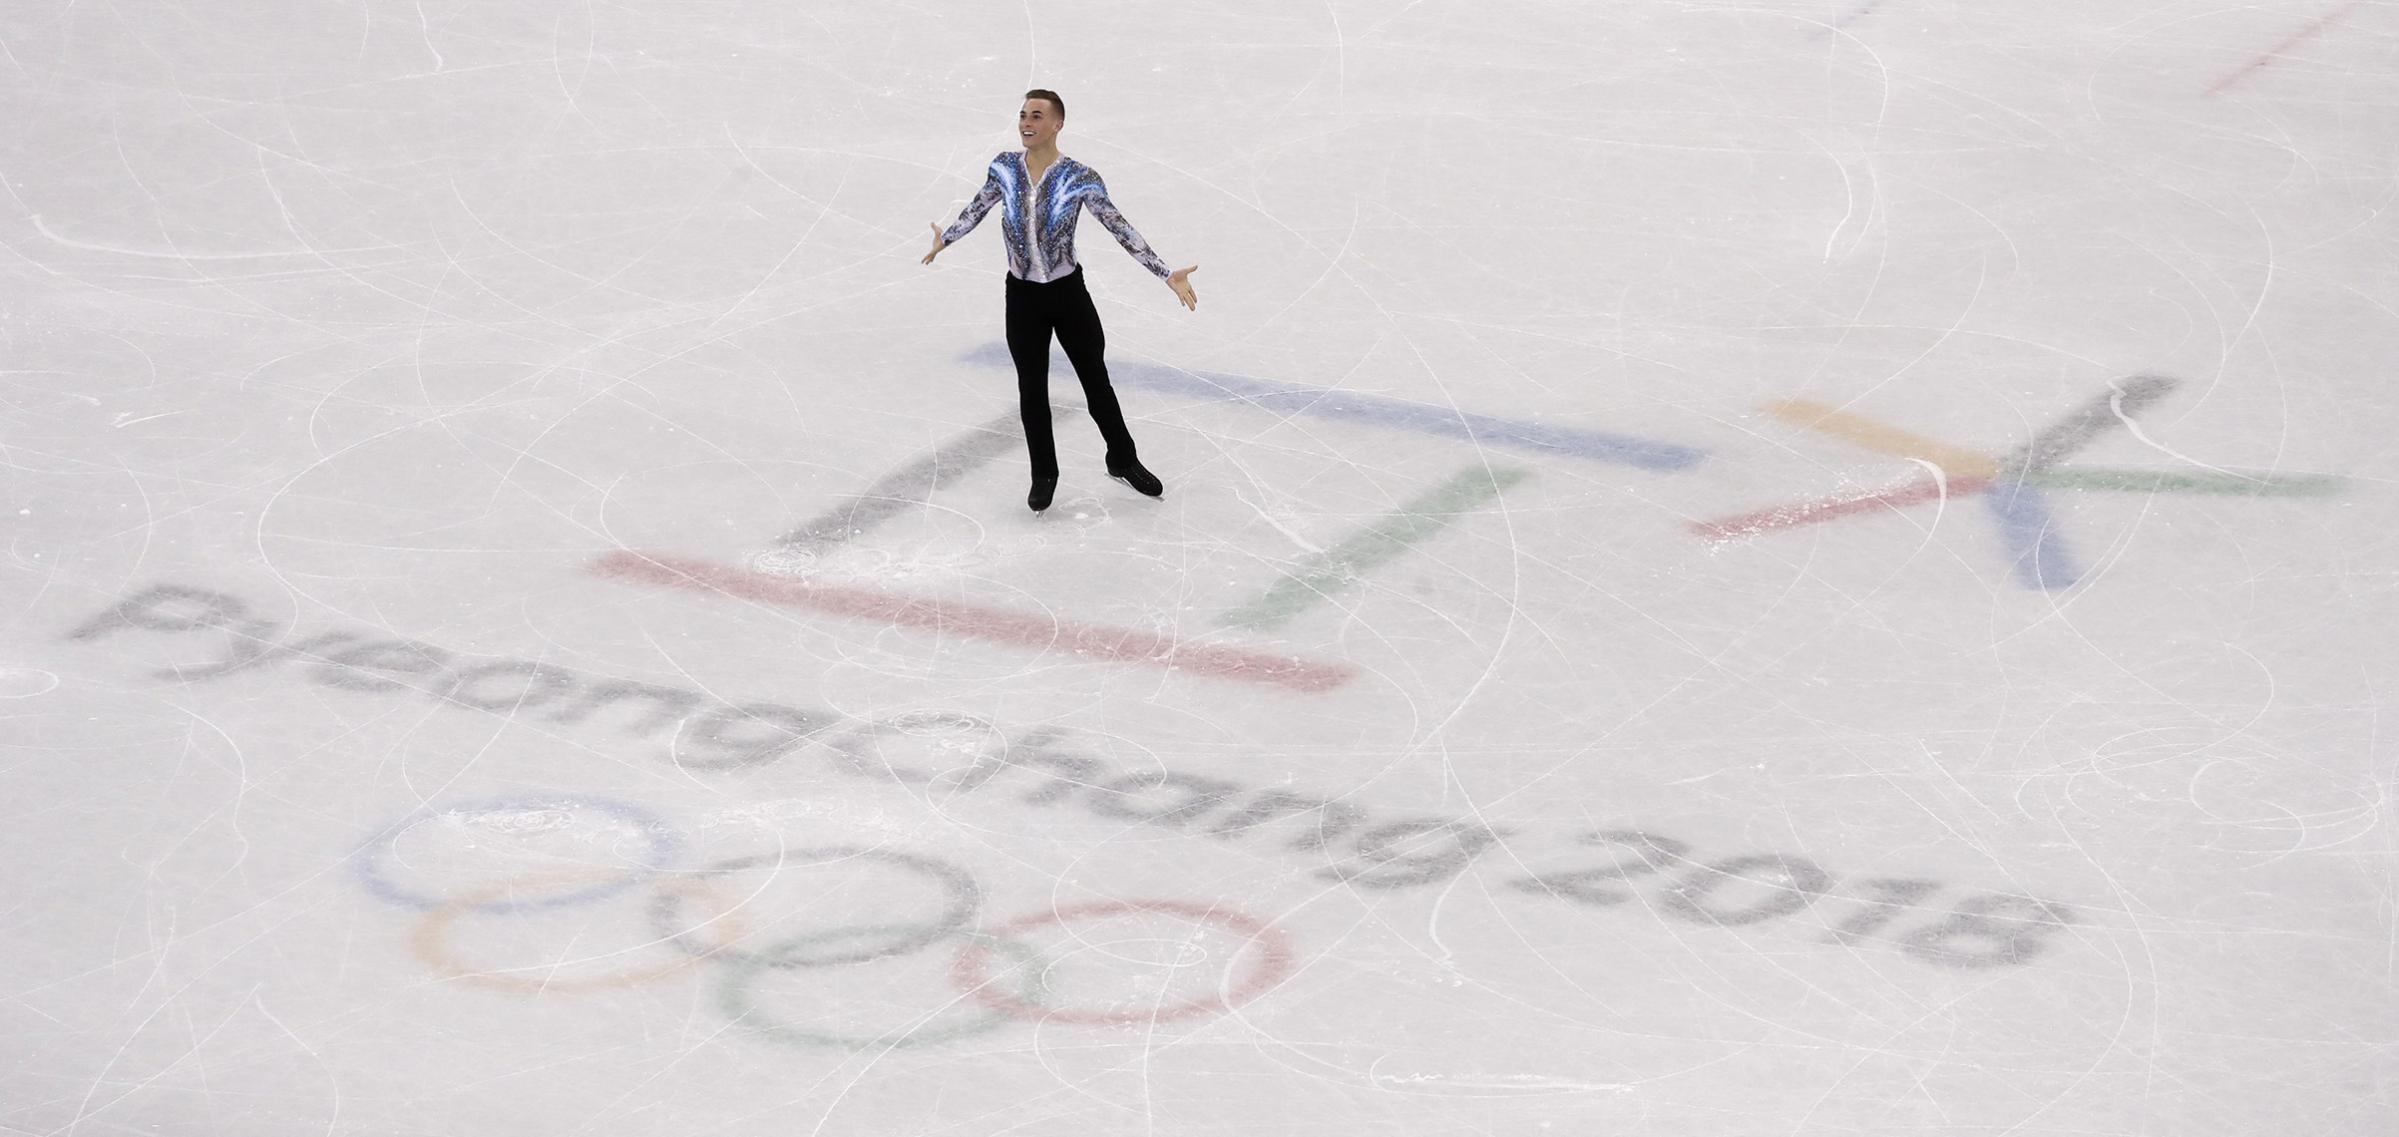 Adam Rippon of the United States performs in the men's single skating free skating in the Gangneung Ice Arena at the 2018 Winter Olympics in Gangneung, South Korea.